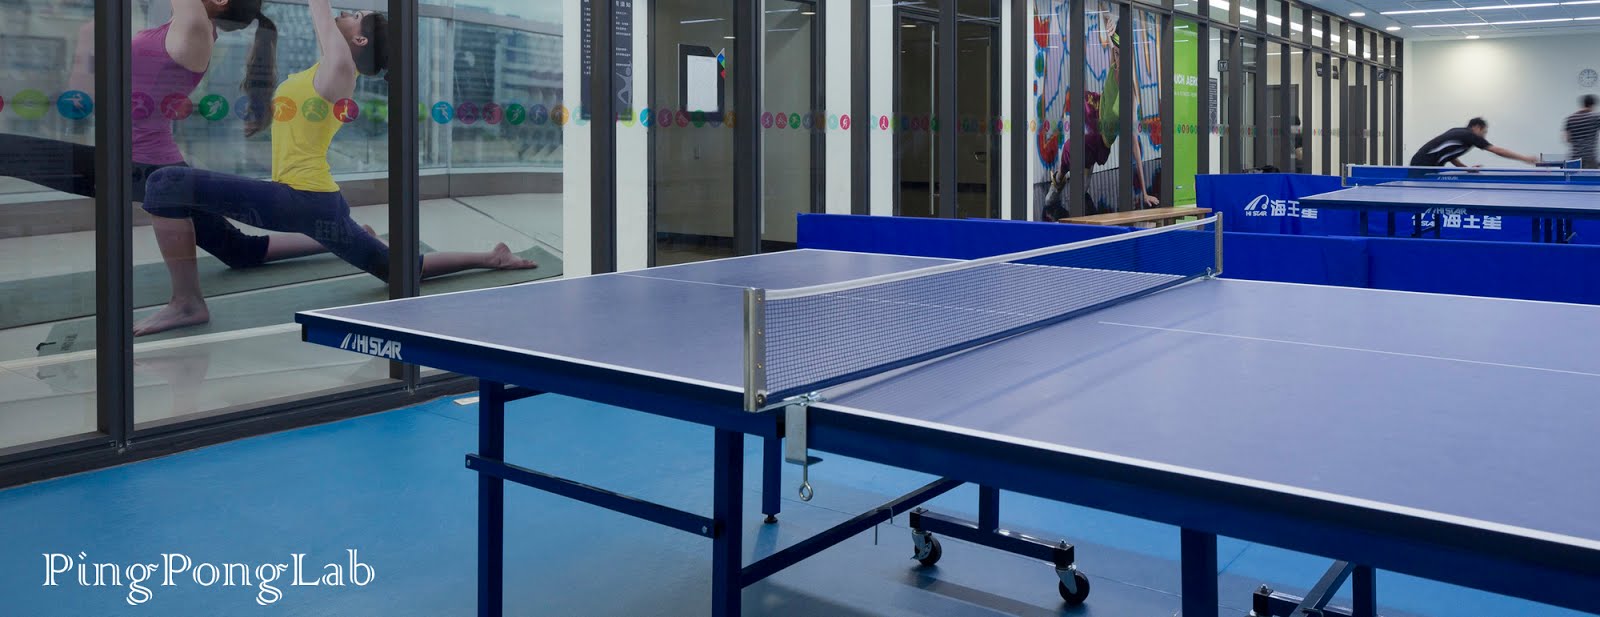 Best Ping Pong Table (Indoor & Outdoor) Reviews 2019